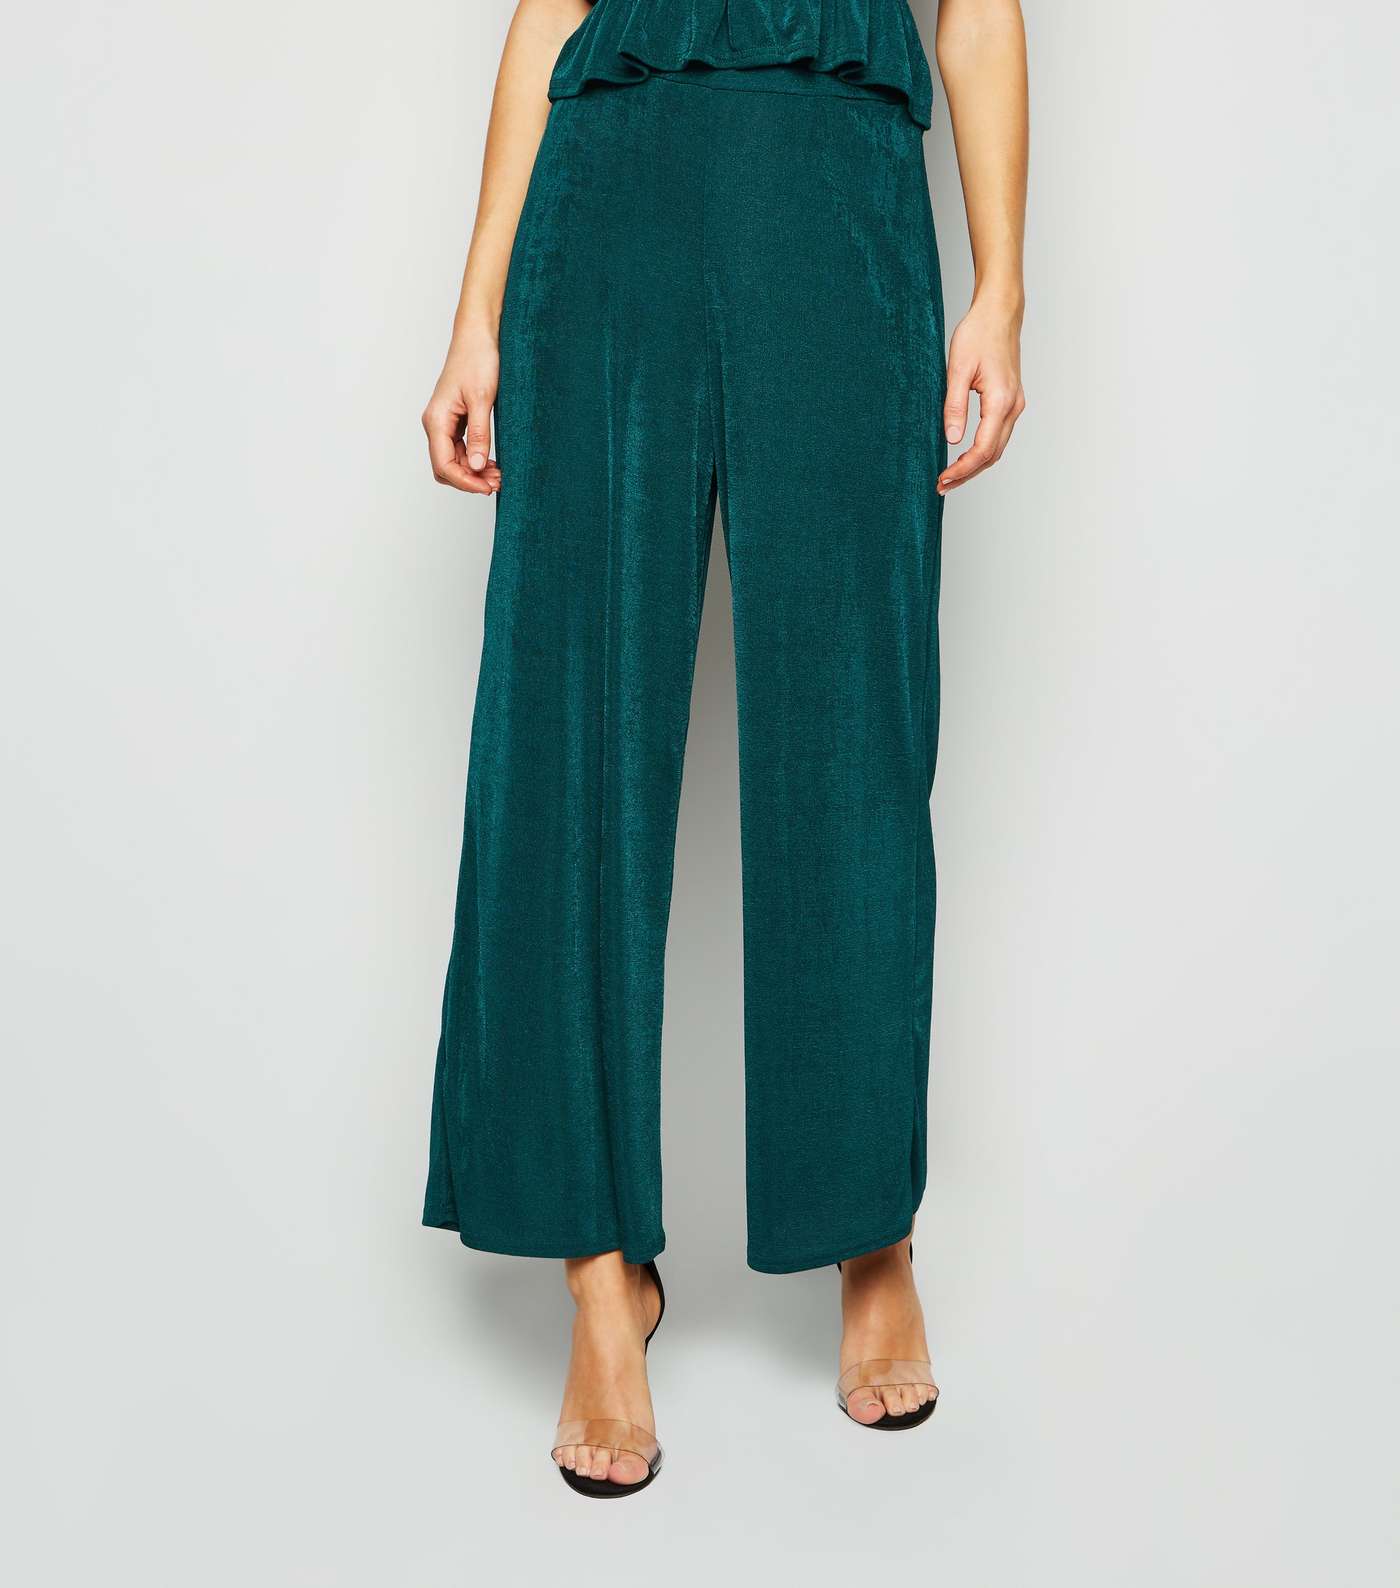 Urban Bliss Teal High Shine Trousers Image 2